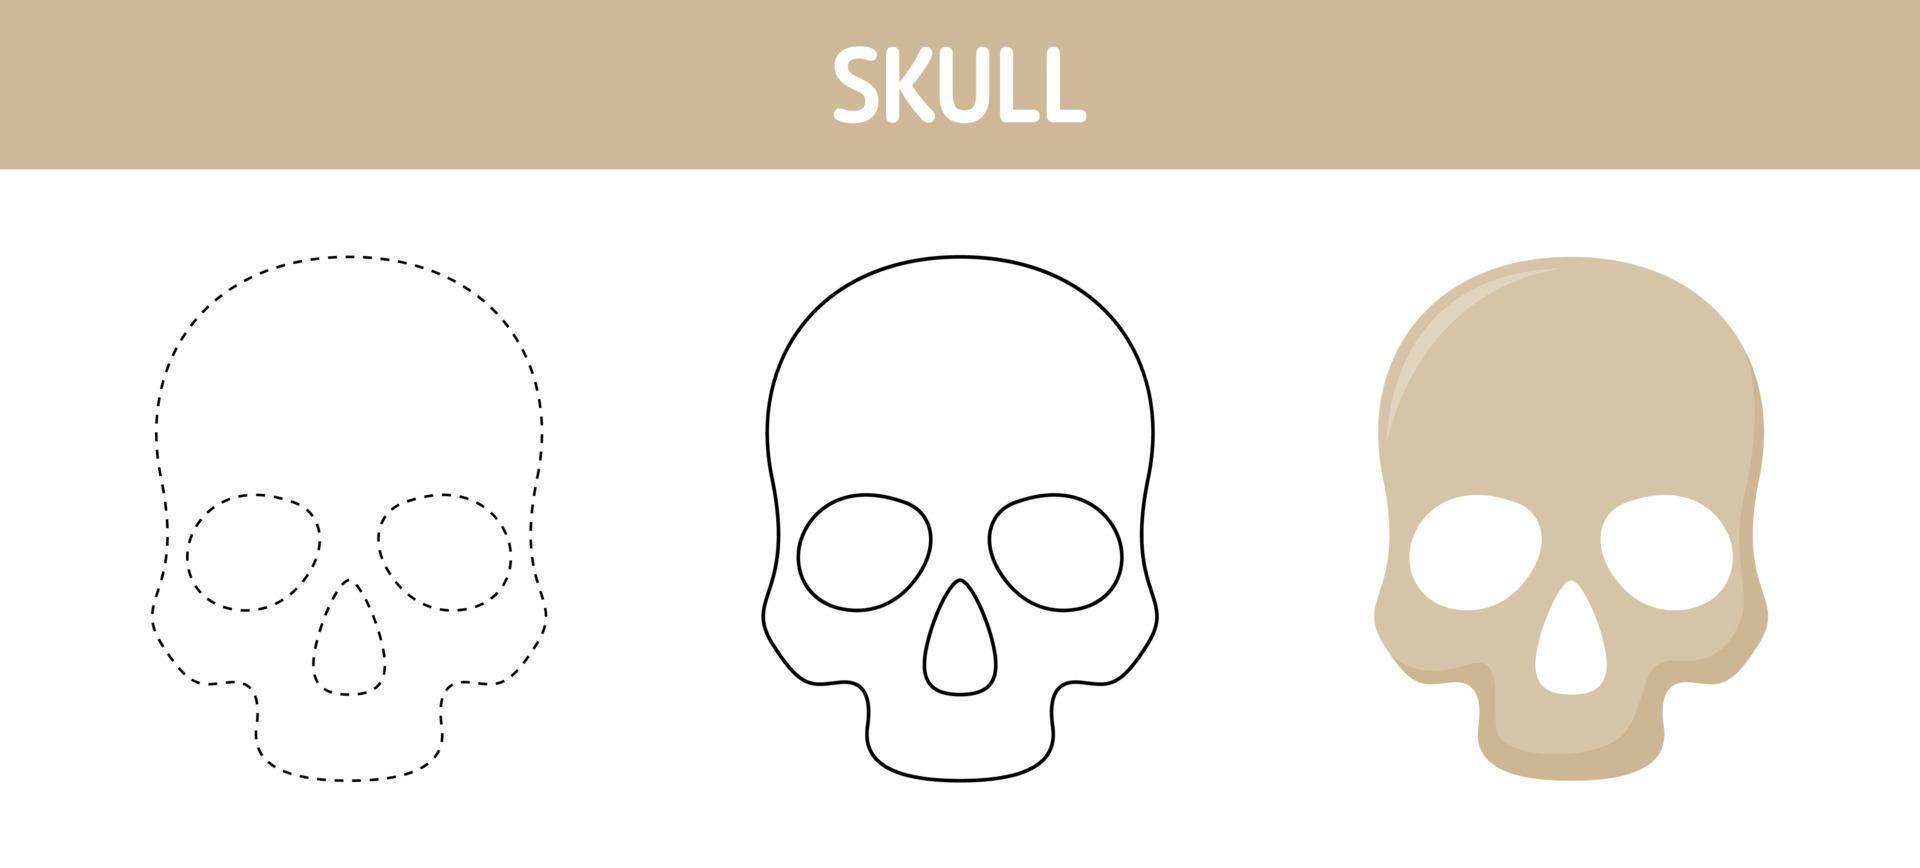 Skull tracing and coloring worksheet for kids vector